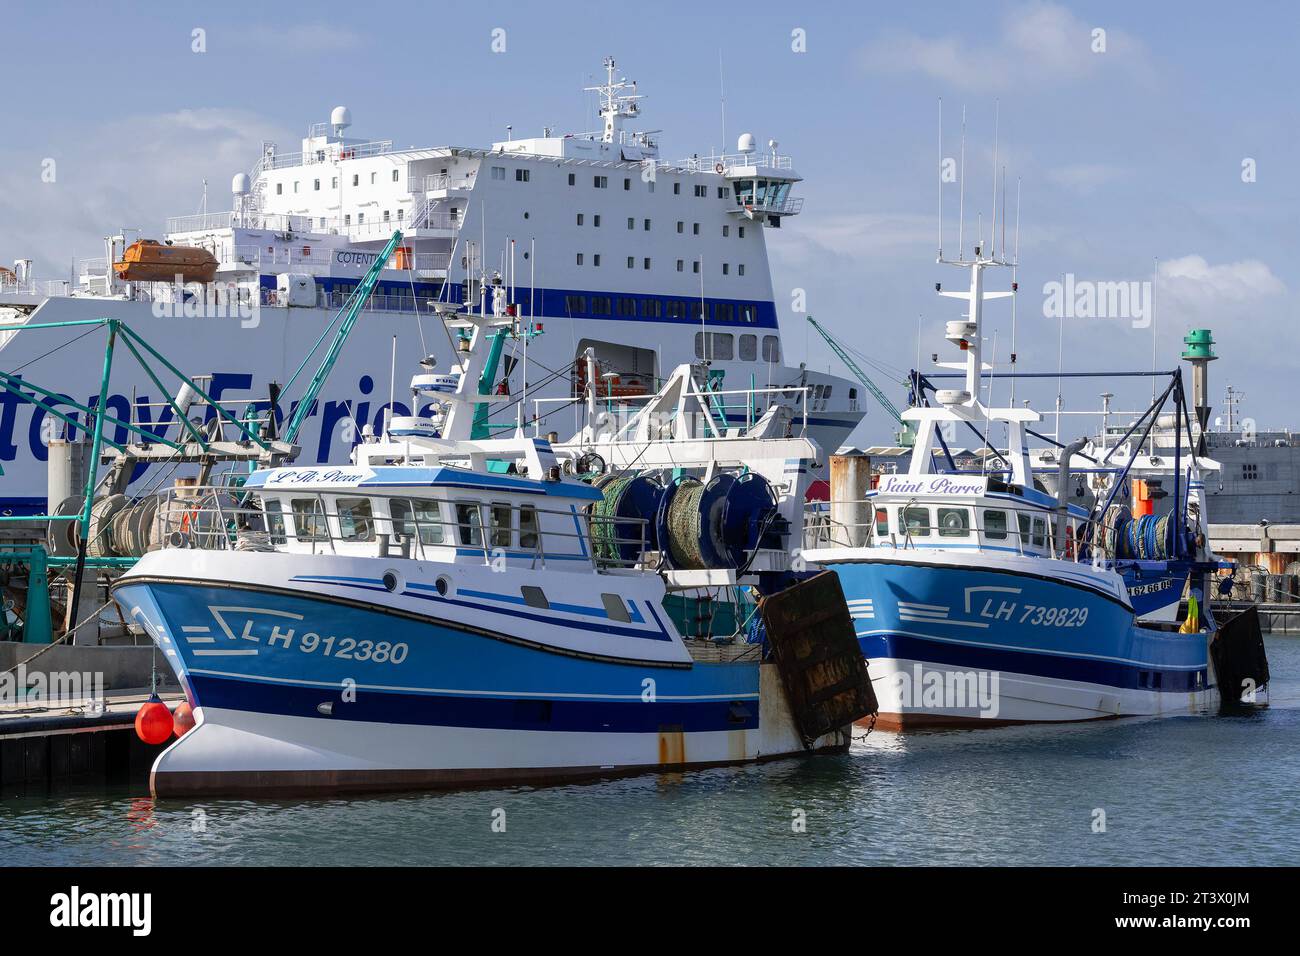 Le Havre, France - Fishing vessels alongside at fishing port of Le Havre. Stock Photo